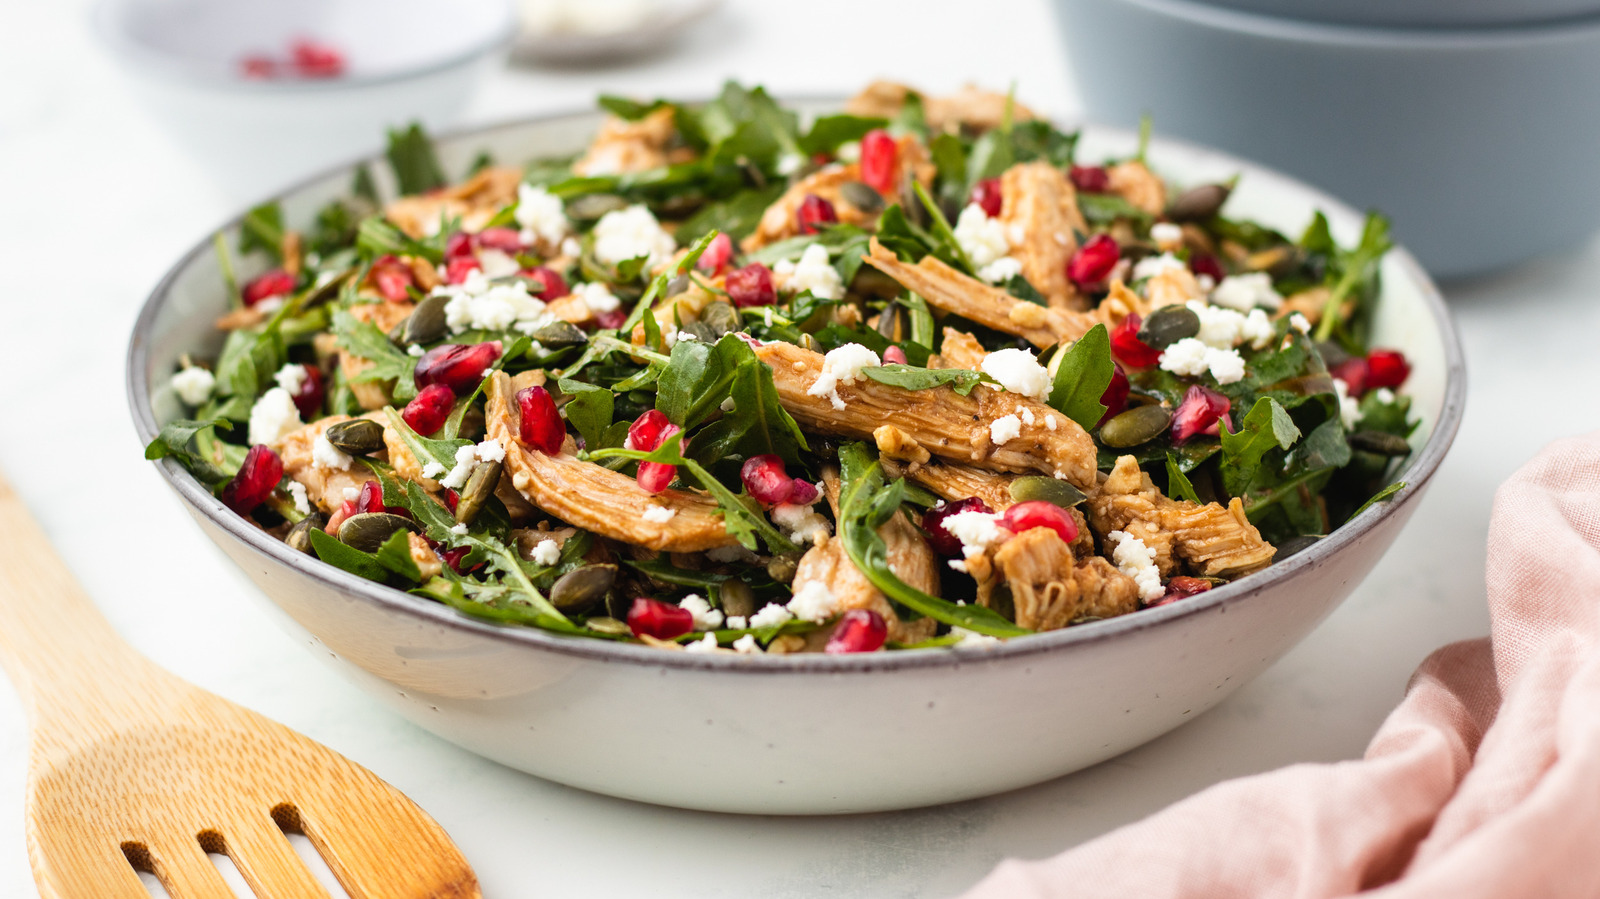 POMEGRANATE JALAPENO AND CHEDDAR CHICKEN SALAD